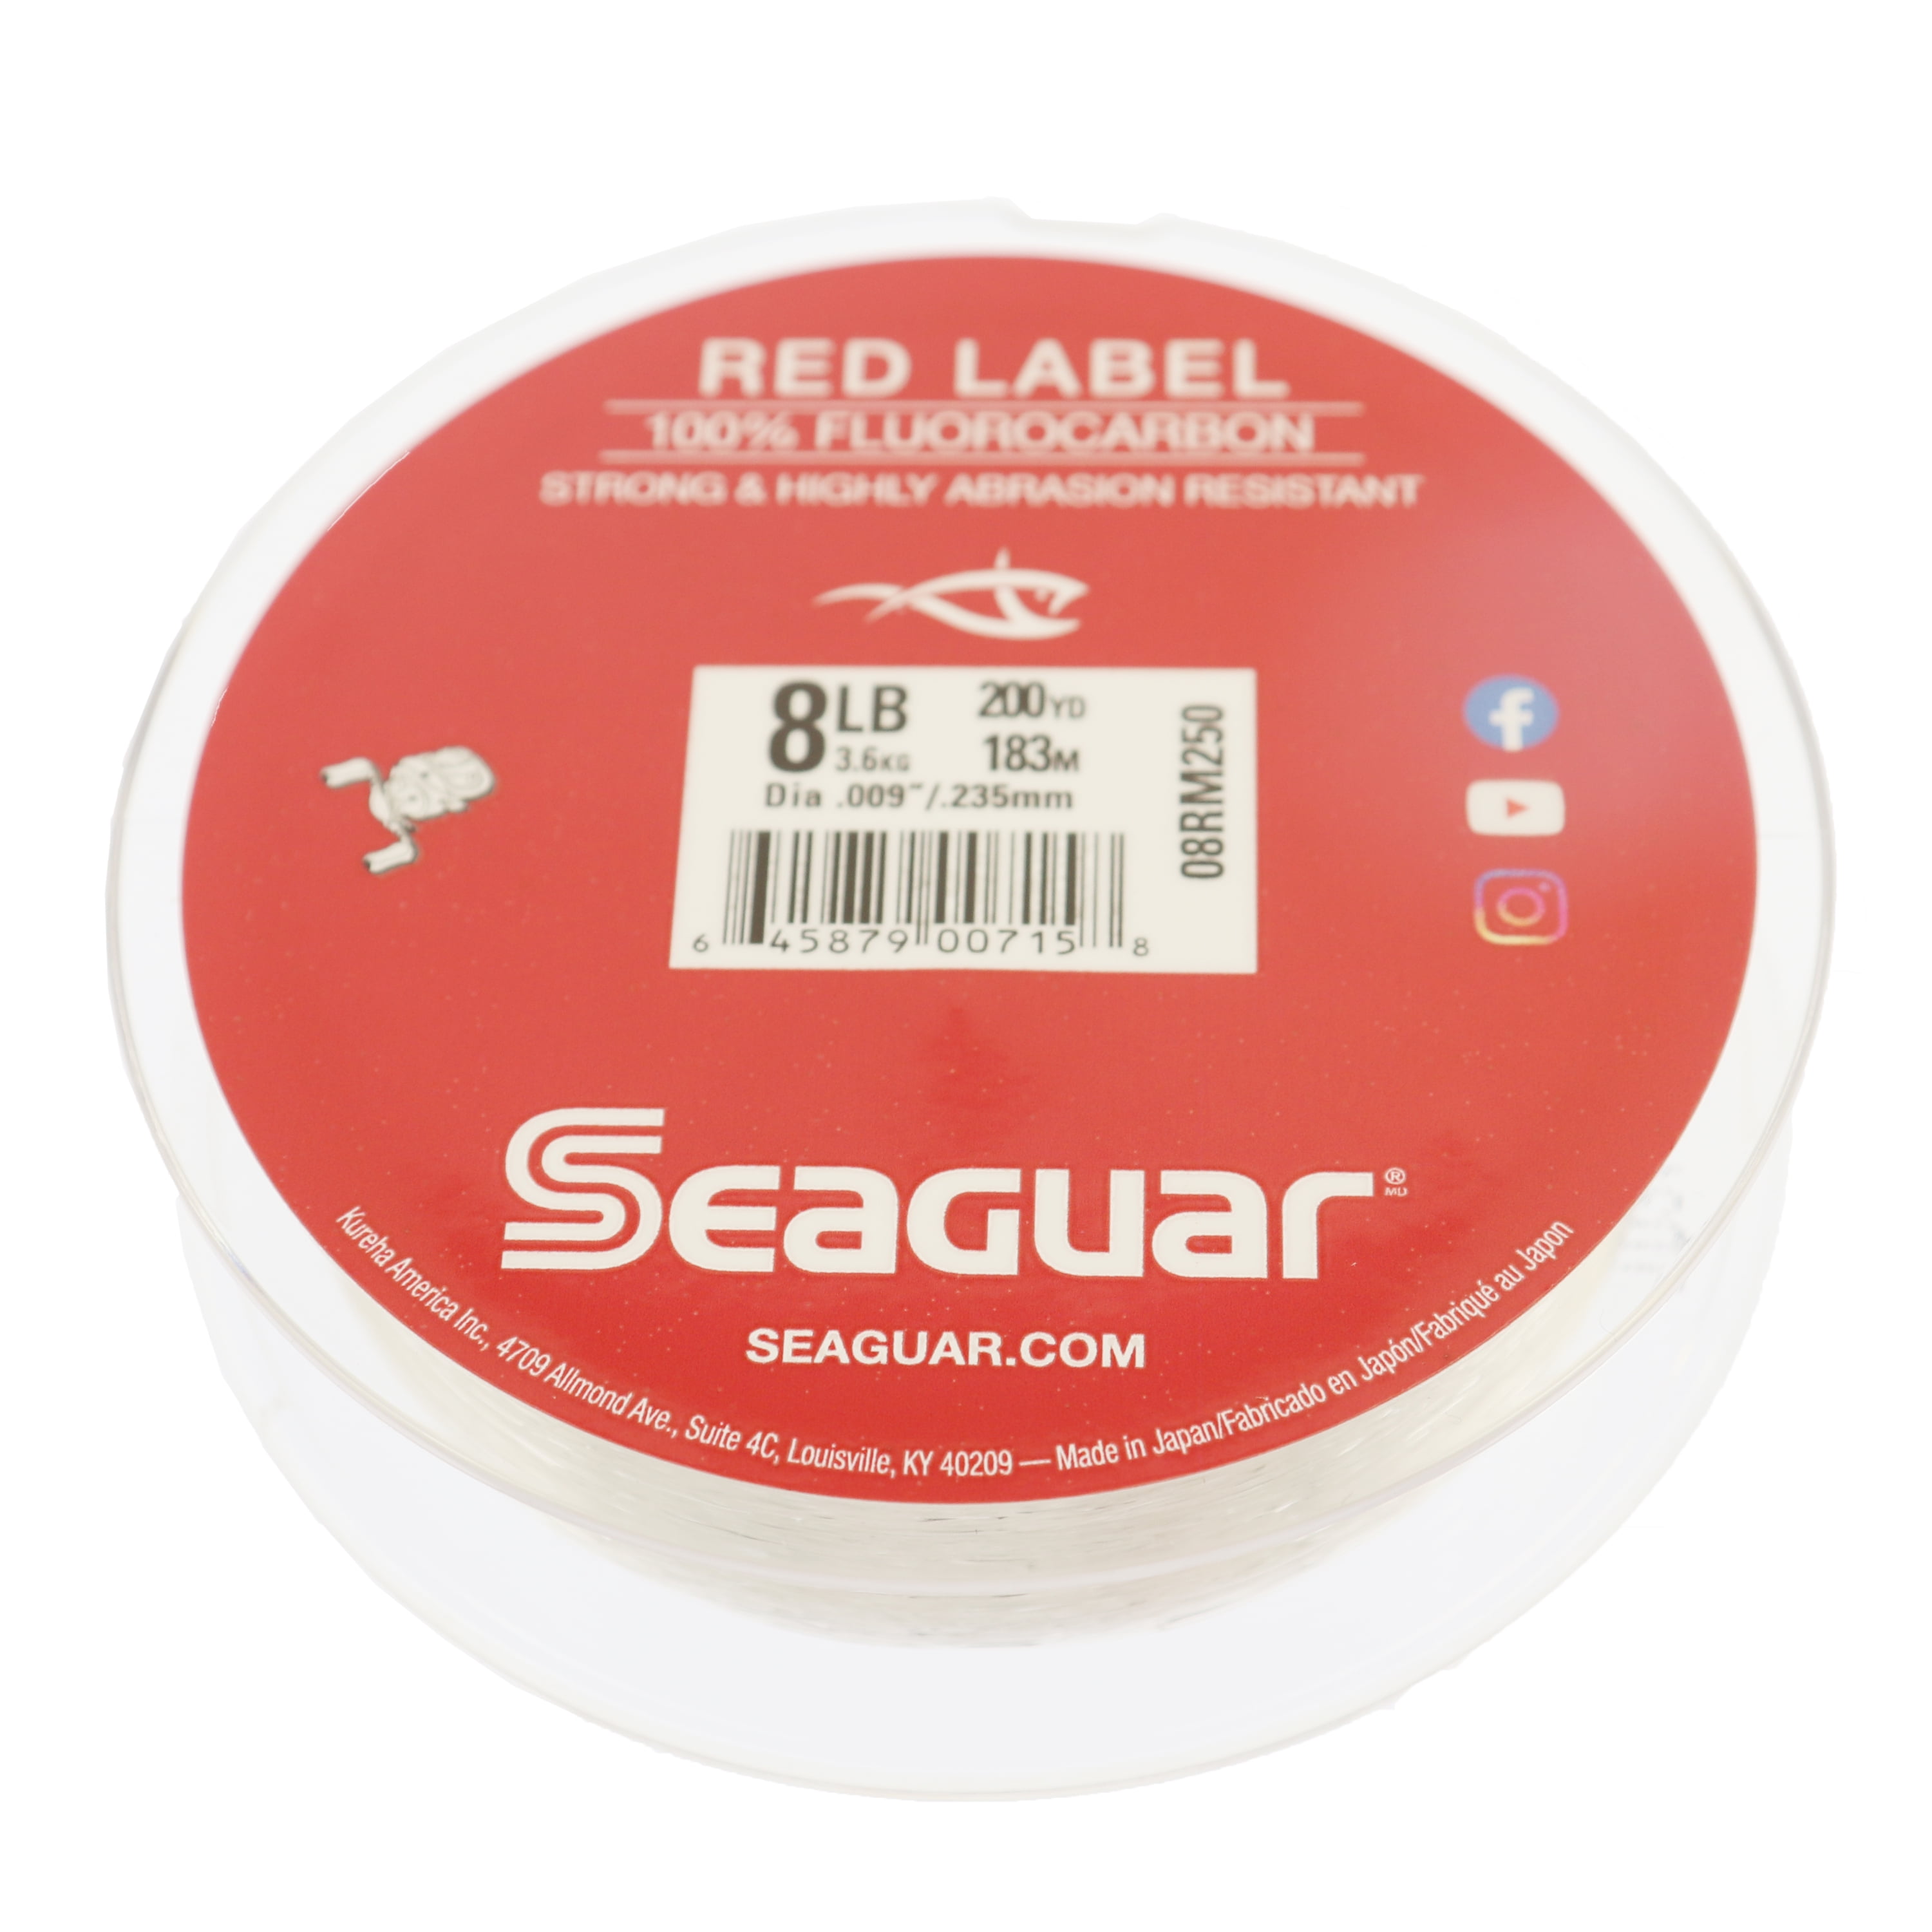 Seaguar Red Label 100% Fluorocarbon Fishing Line 8lbs, 200yds Break  Strength/Length - 08RM250 